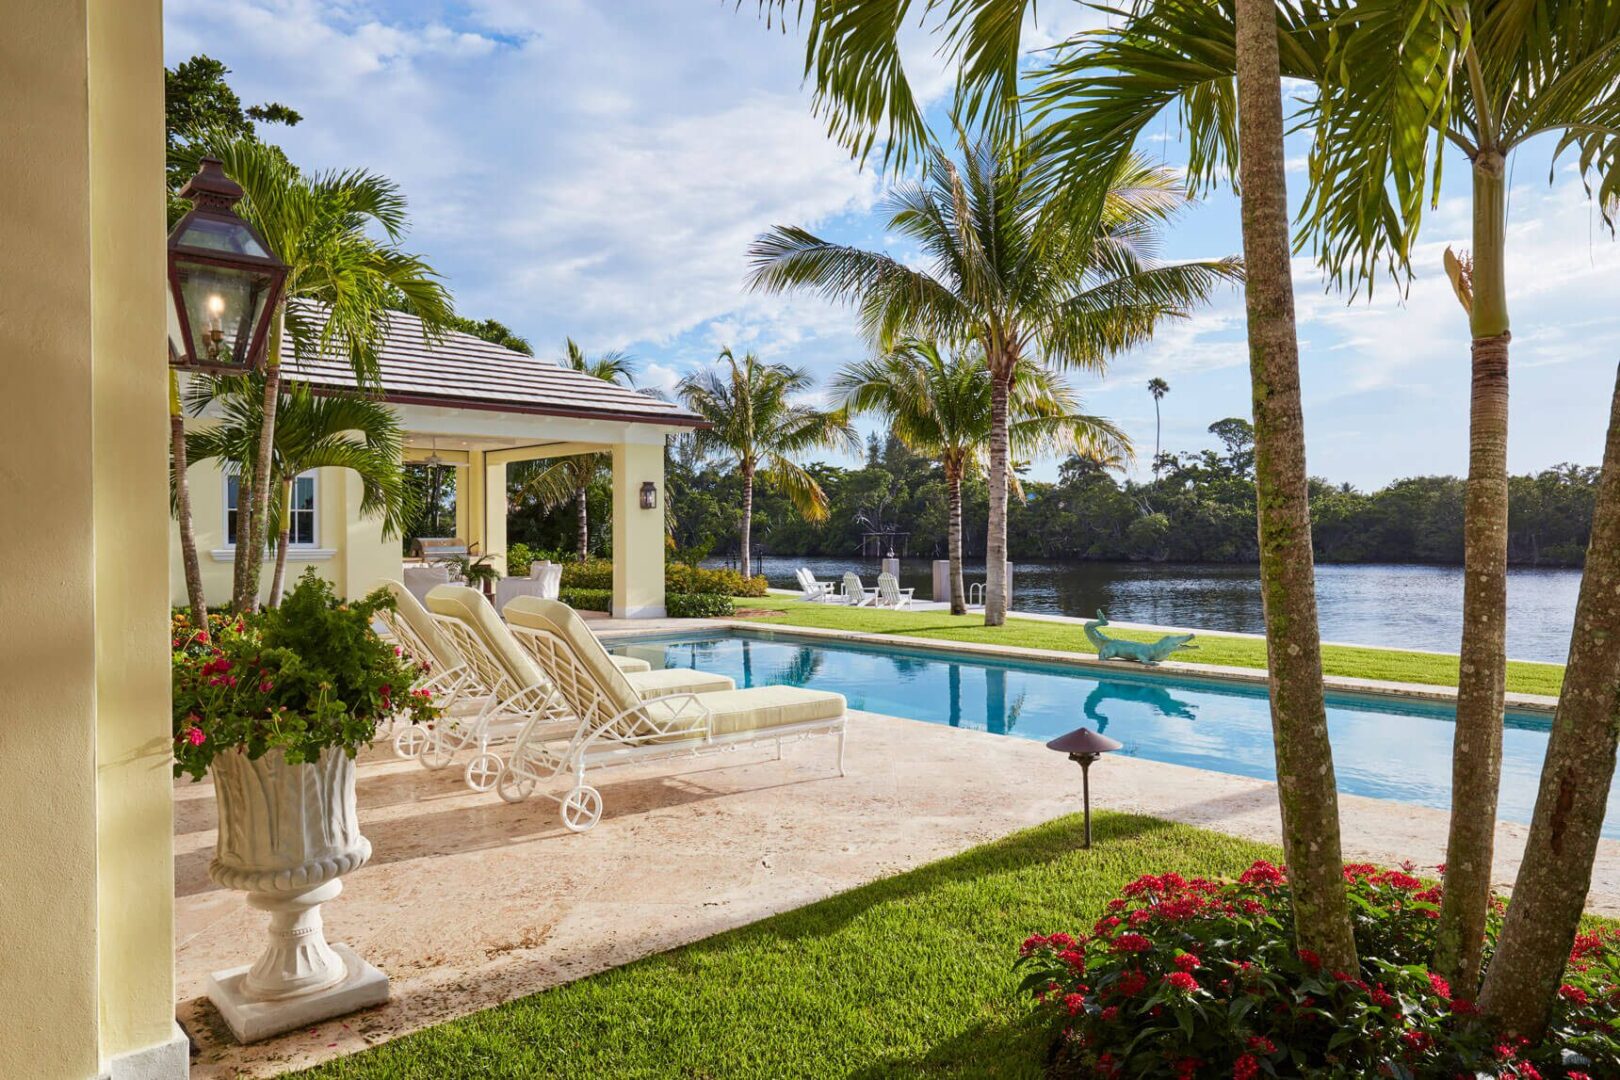 A pool with a gazebo and palm trees in the background.